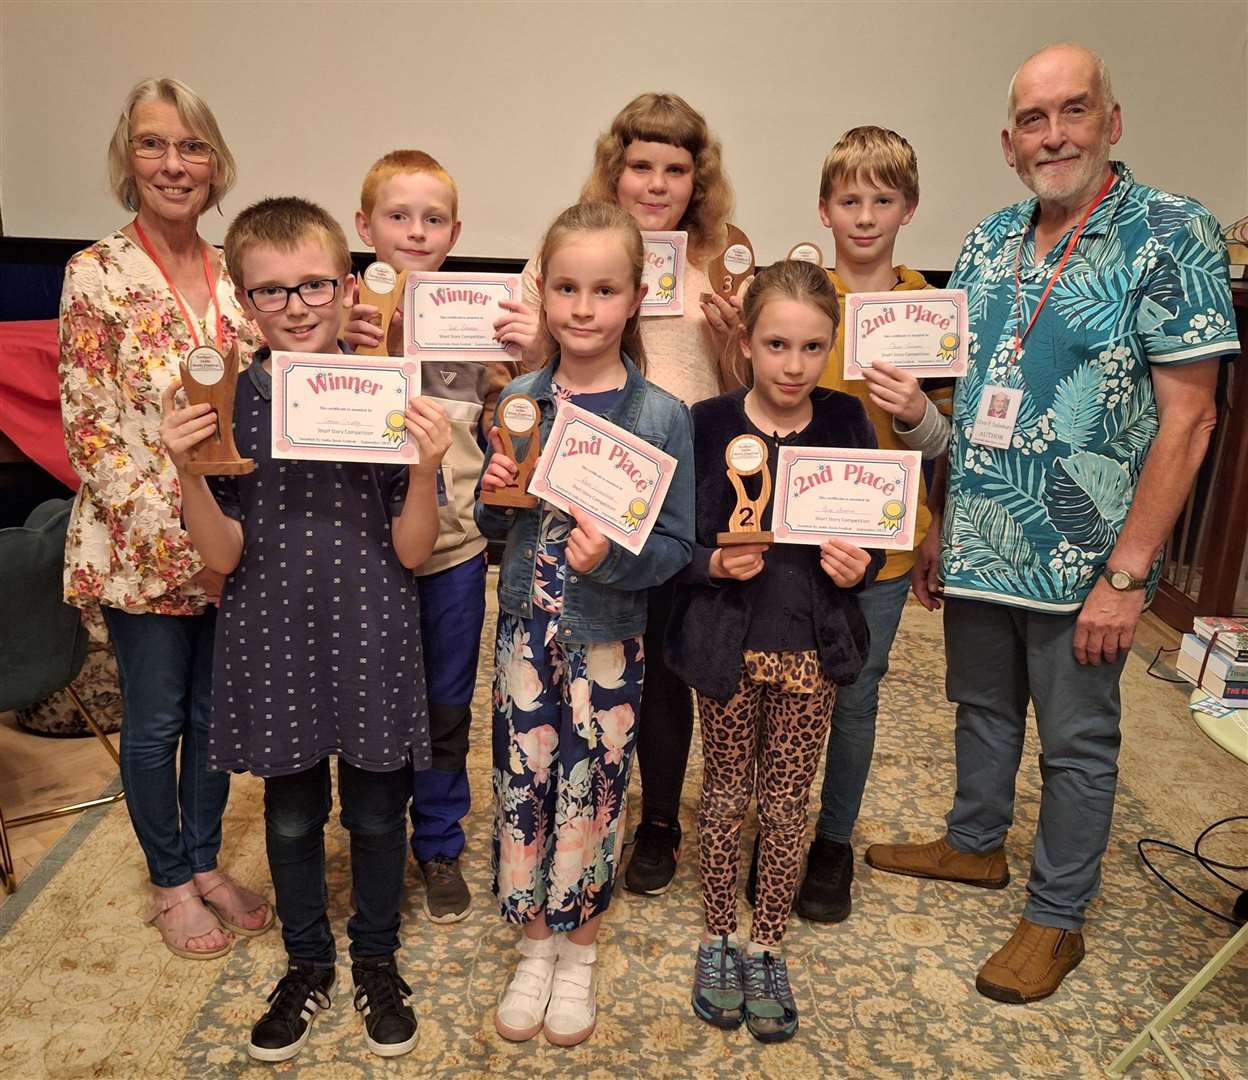 Glyn Salisbury and Carolyn Bilyard with winners from Caithness who were present to receive their awards and certificates on the night. Back row, from left: Jack Robertson, Larissa McPhee and Oliver Currums, all Castletown. Front row, from left: Connor Crossley, Watten, Reese Sutherland, Wick and Paige Stoneman, Castletown.